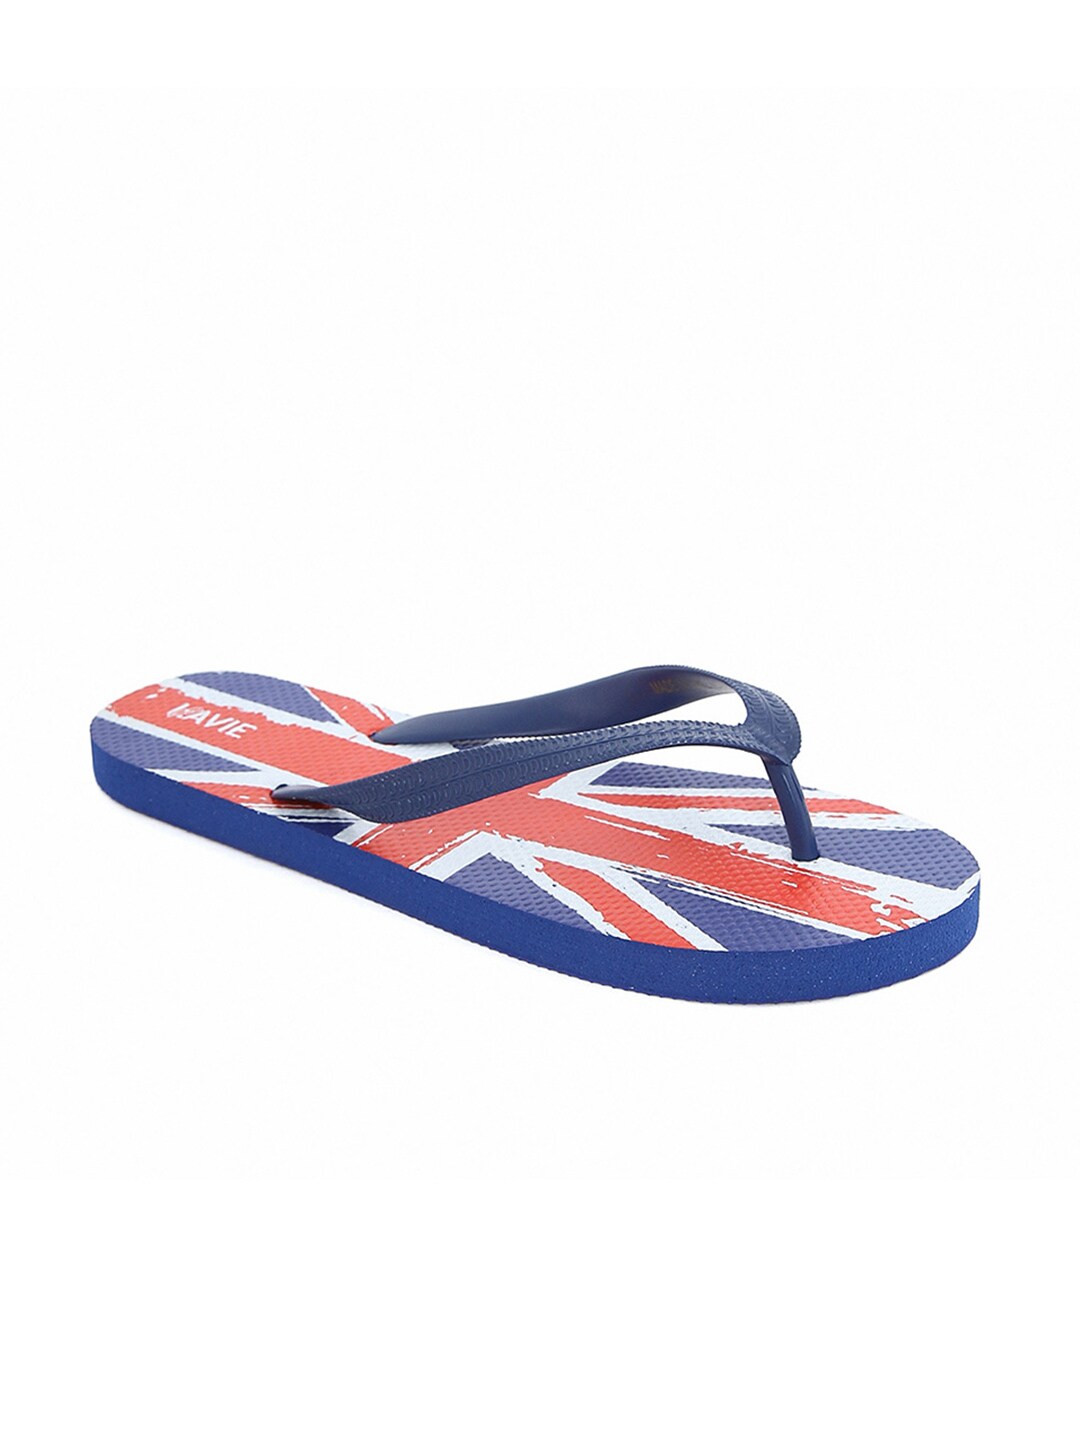 Lavie Women Blue & Red Printed Room Slippers Price in India